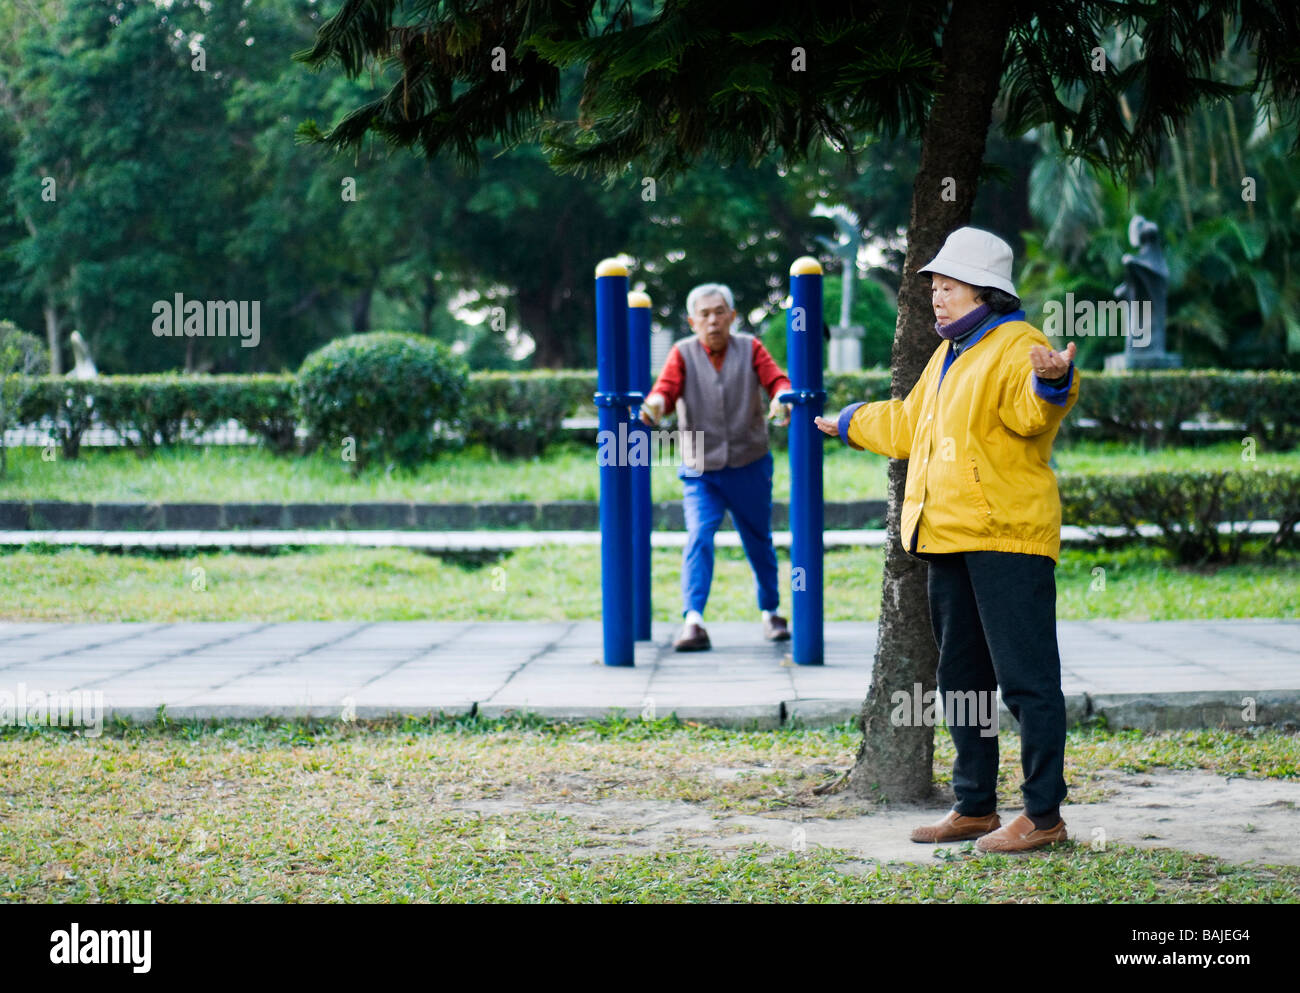 two elderly people man and female exercising in a park in the early morning in Taipei dressed in bright cloths Stock Photo